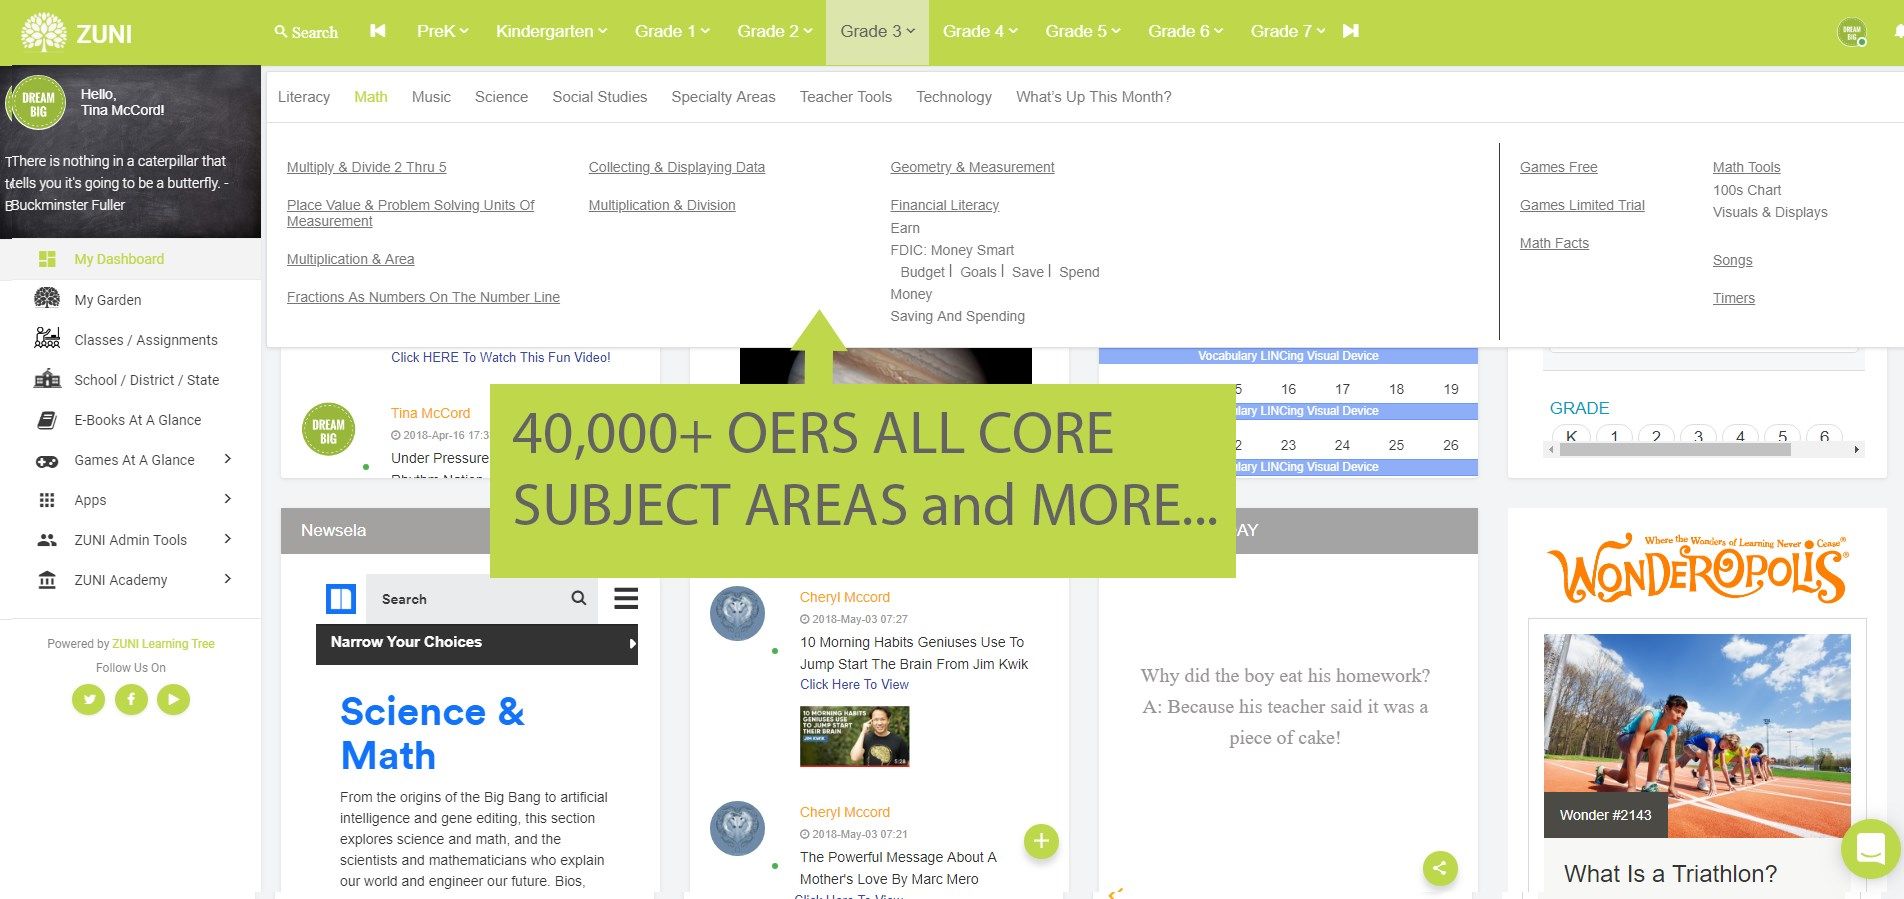 In 3 clicks, you'll access lesson ideas, videos, games, print material, SMART notebooks and more.